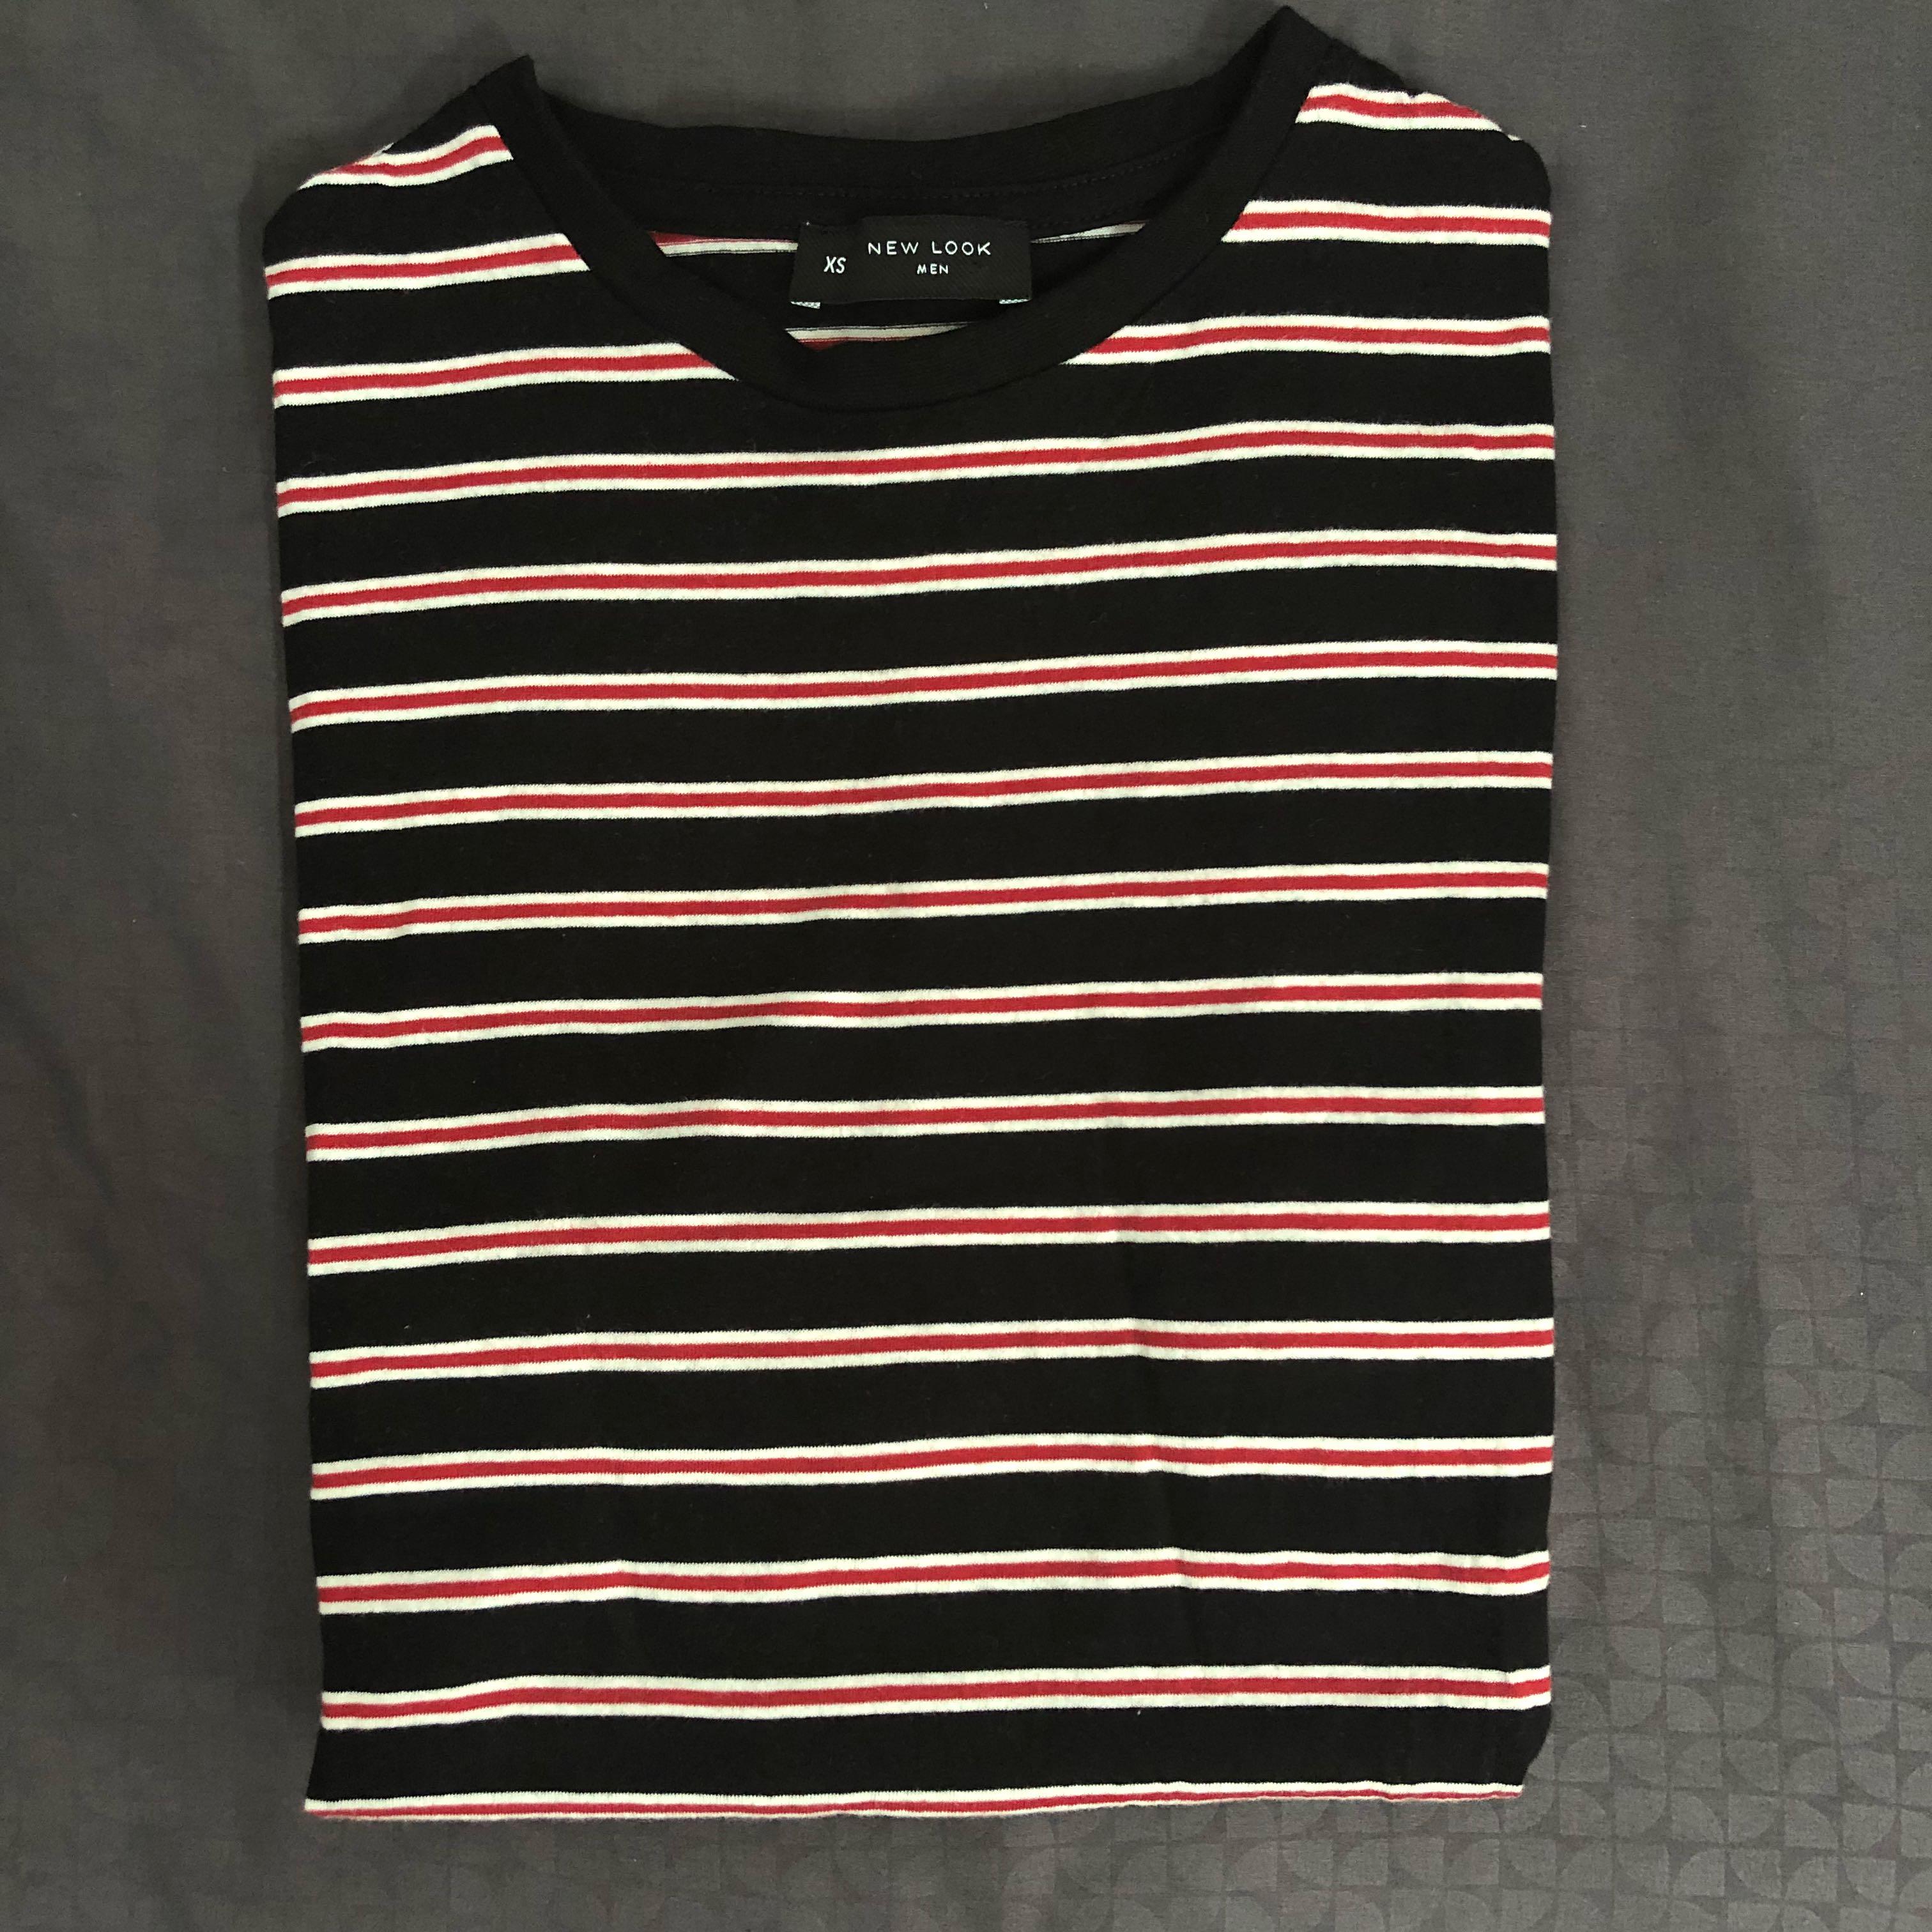 red white and black striped shirt